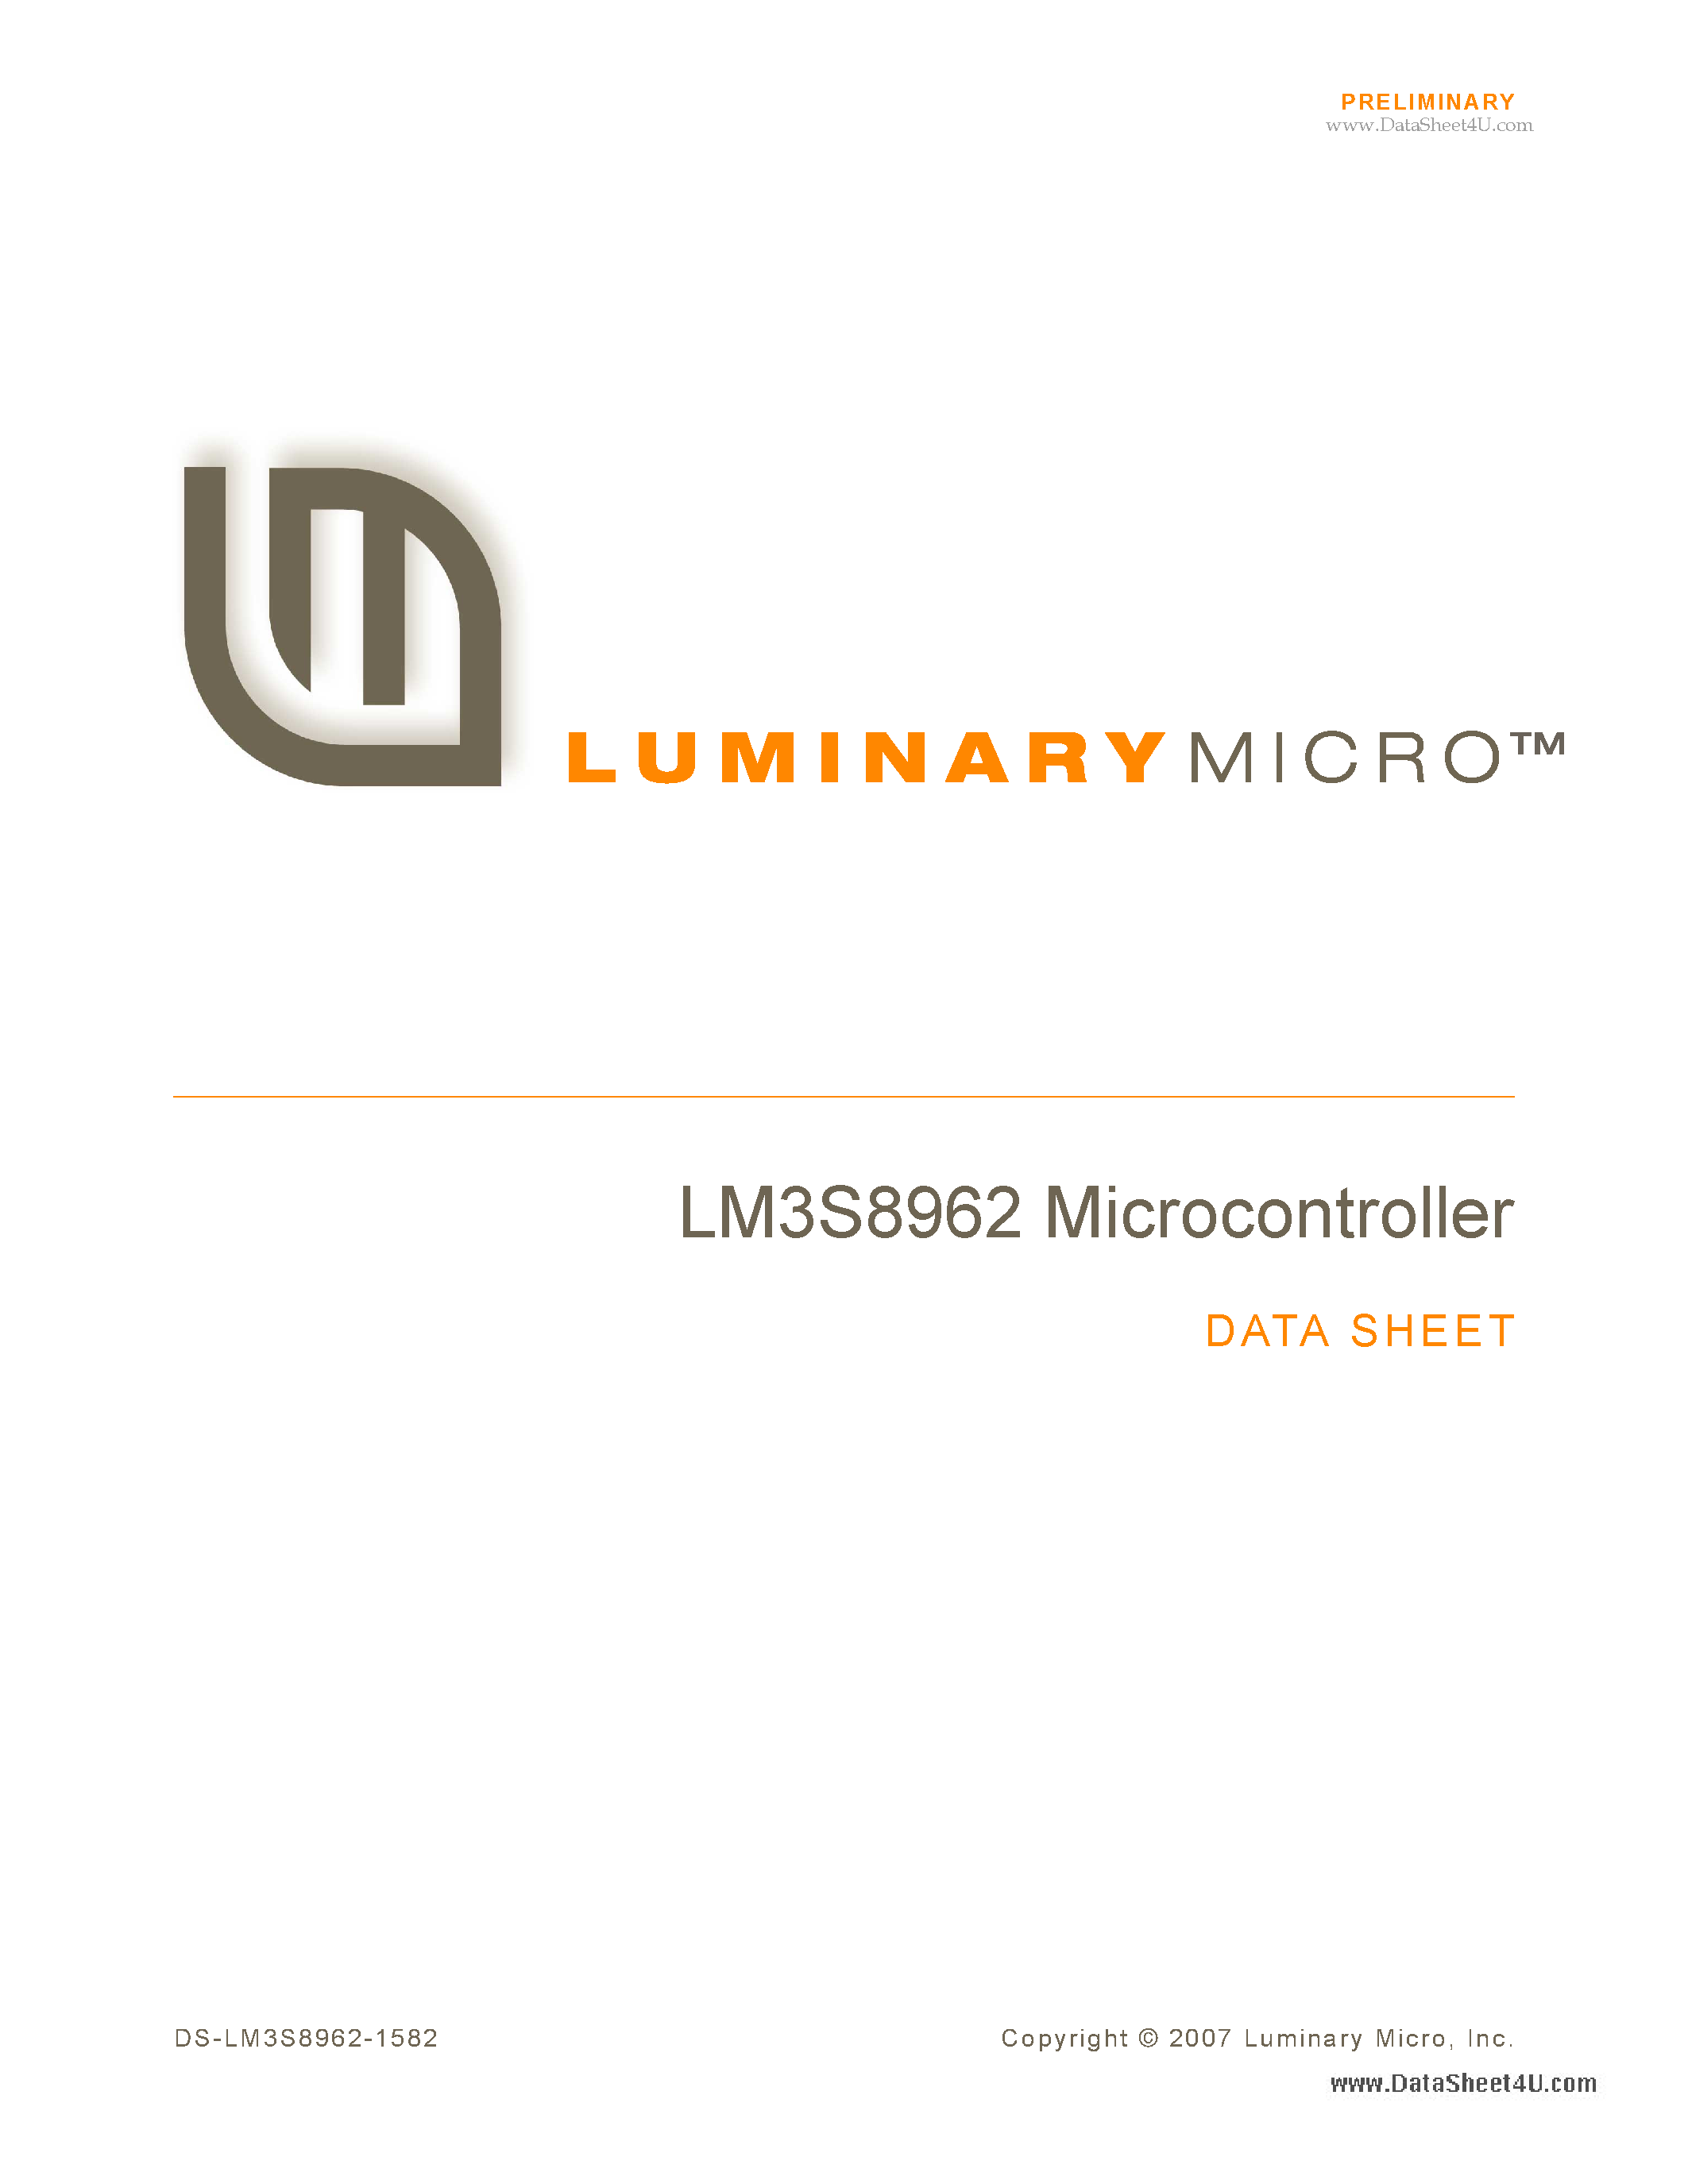 Datasheet LM3S8962 - Microcontroller page 1